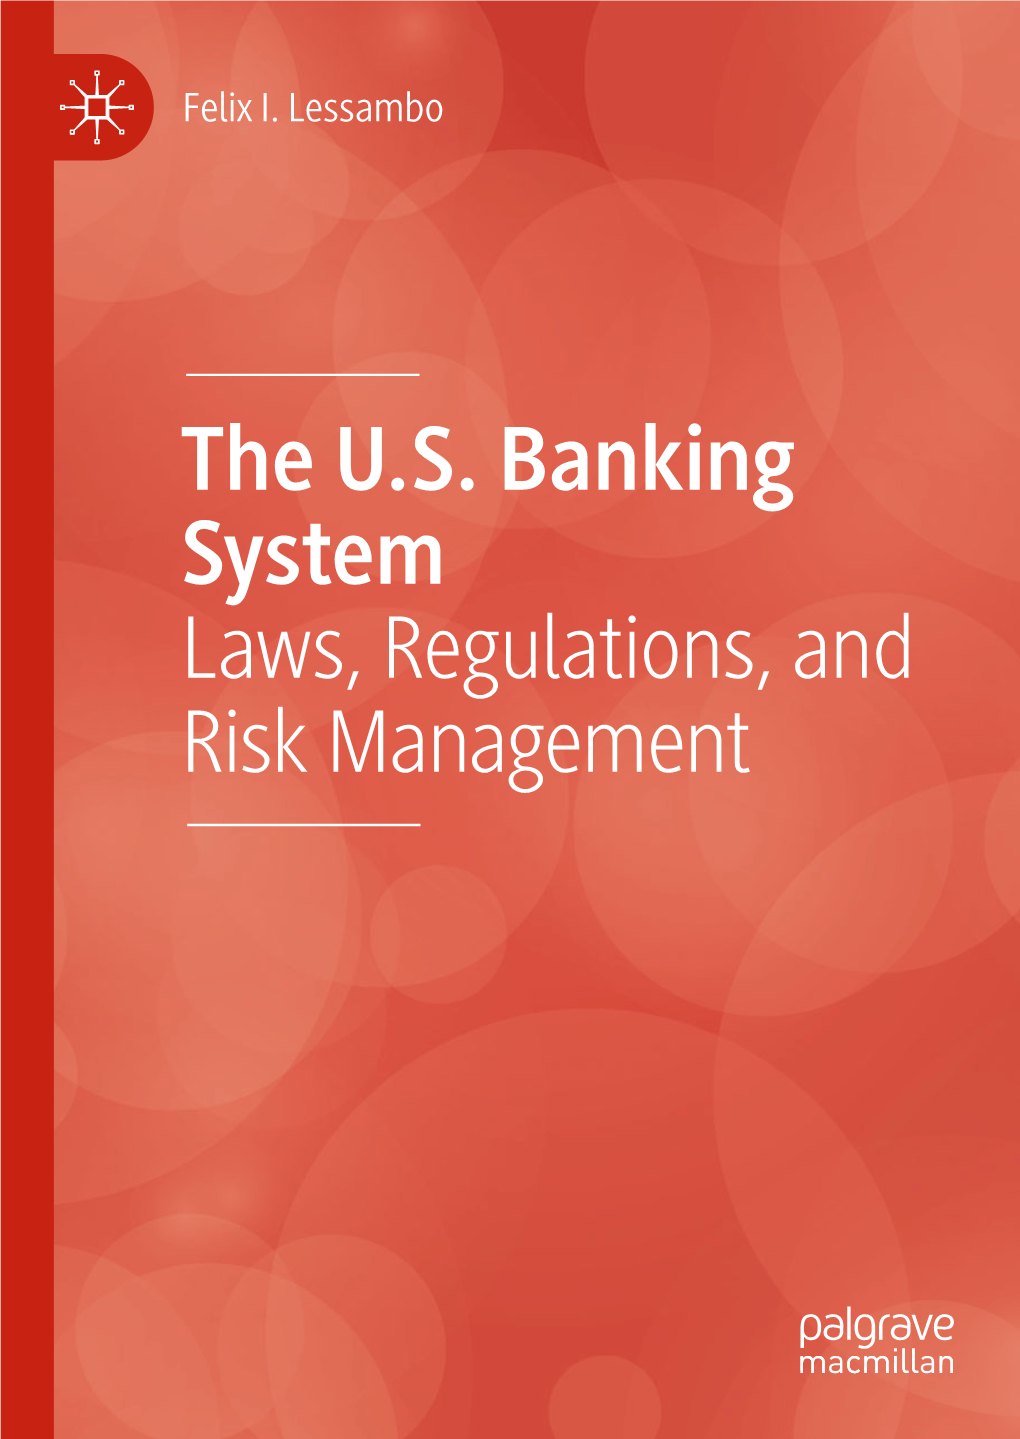 The U.S. Banking System Laws, Regulations, and Risk Management the U.S